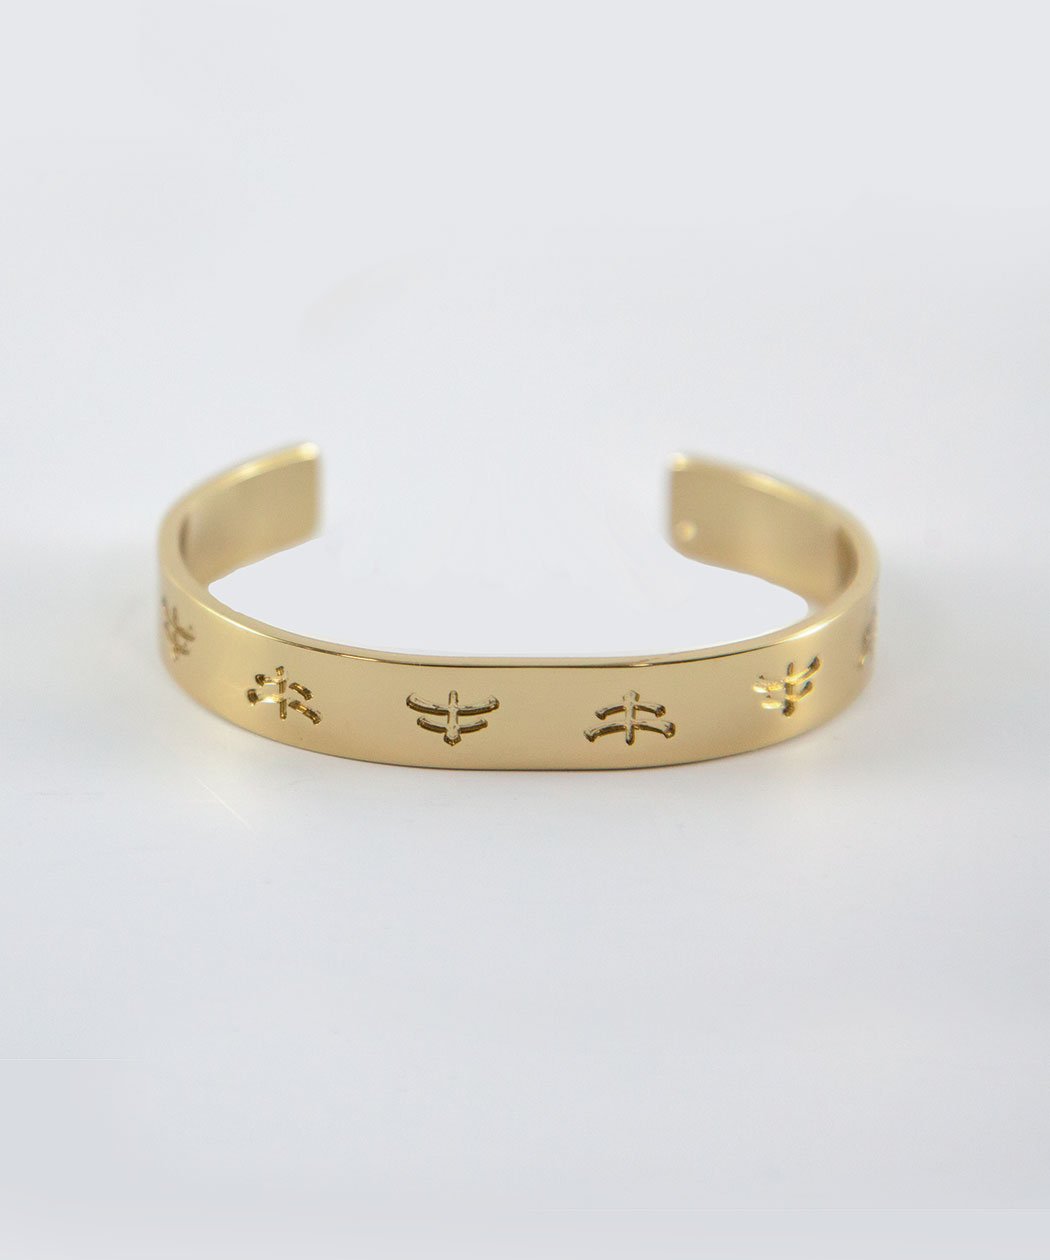 Temple brass bangle | bangle | brass | fashion accessories | Makebe | bracelet | riding | equestrian | made in Italy | handmade |